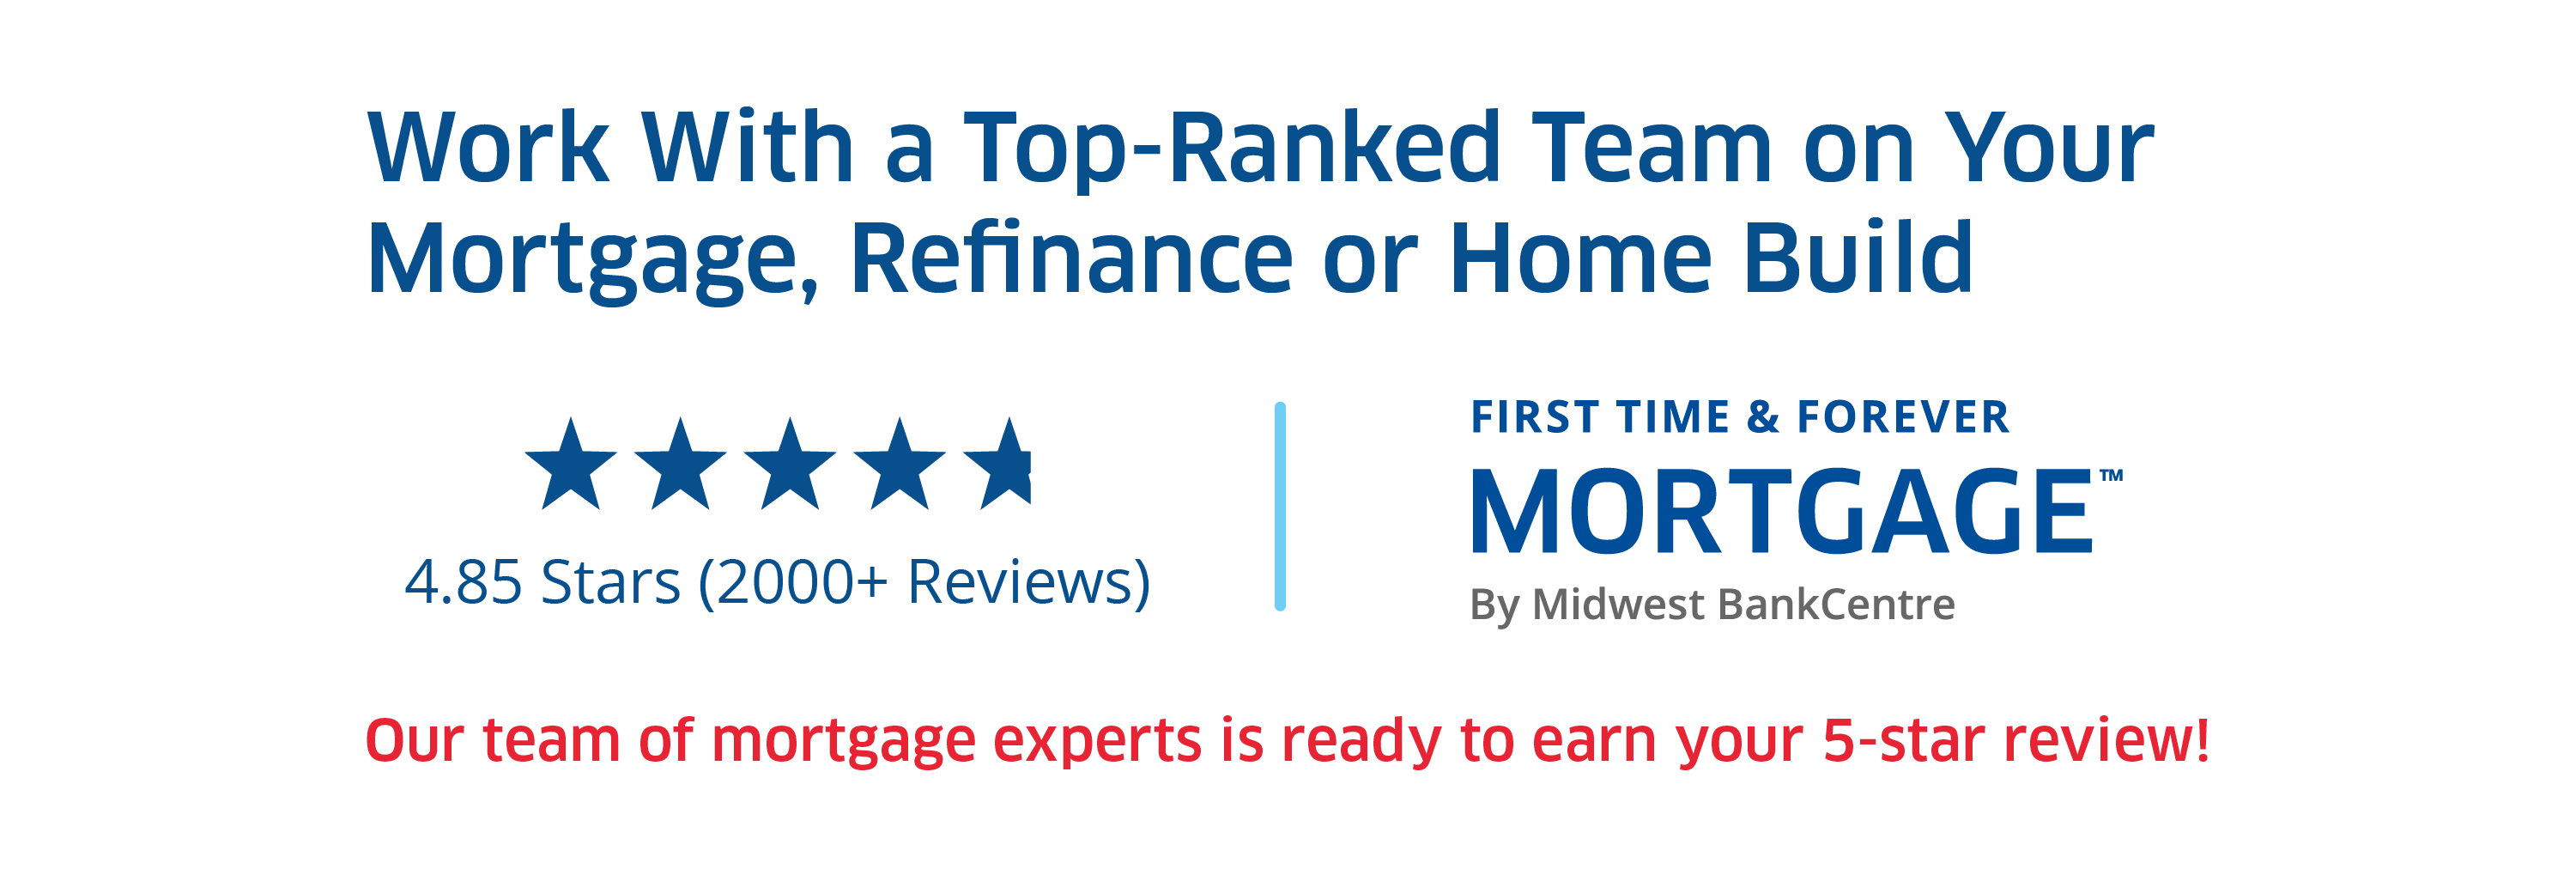 Mortgage Review Count and Star Rating